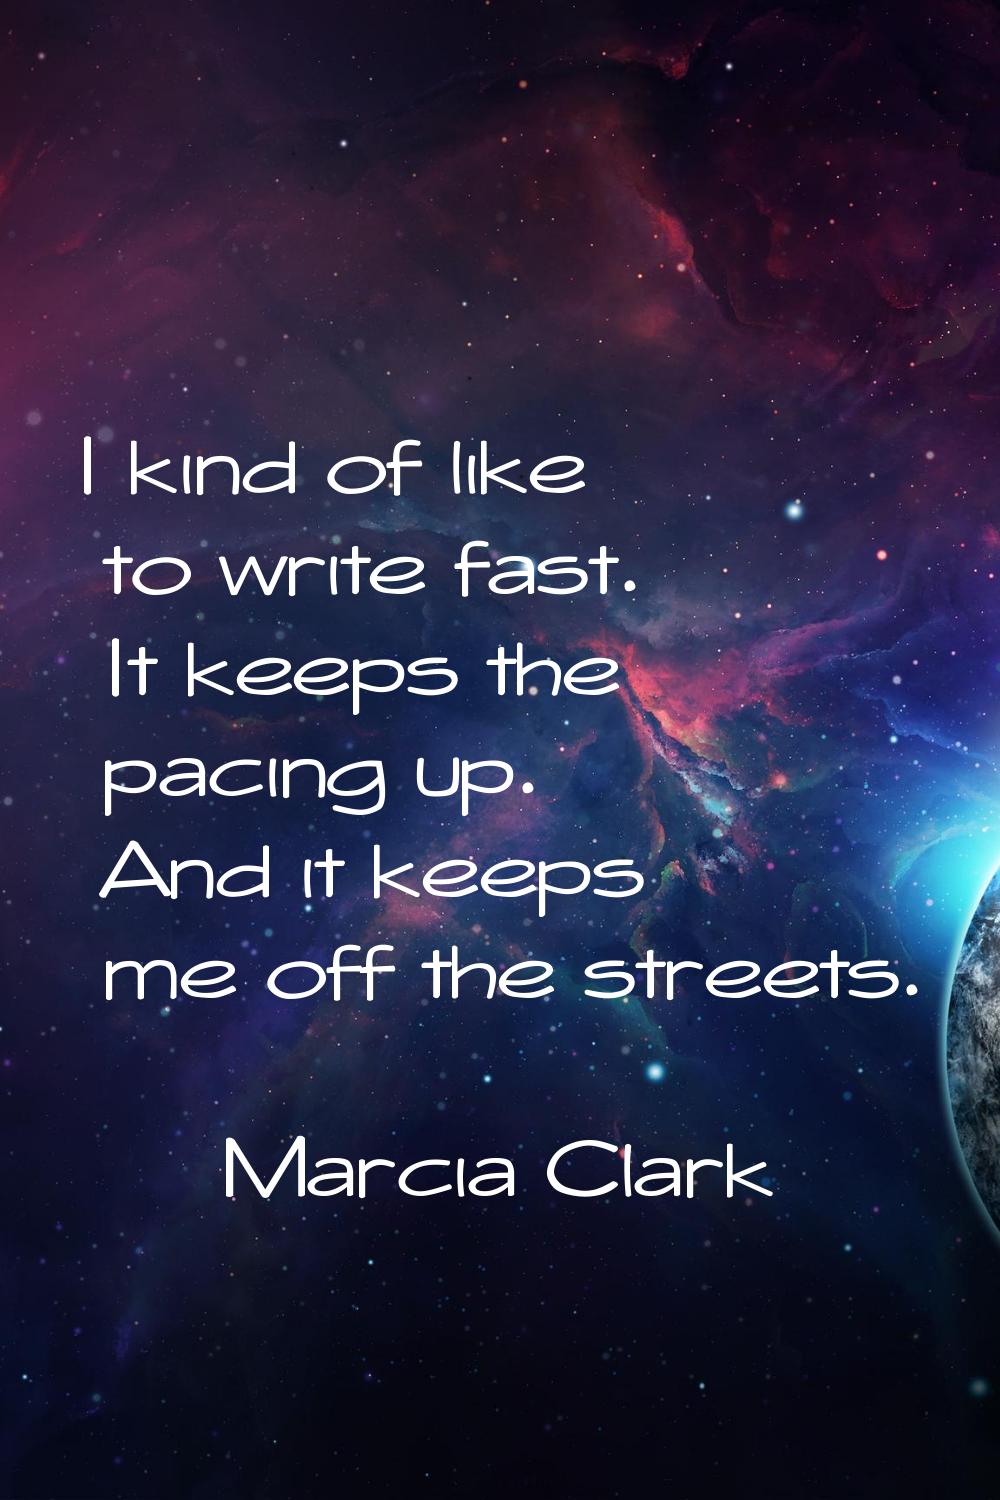 I kind of like to write fast. It keeps the pacing up. And it keeps me off the streets.